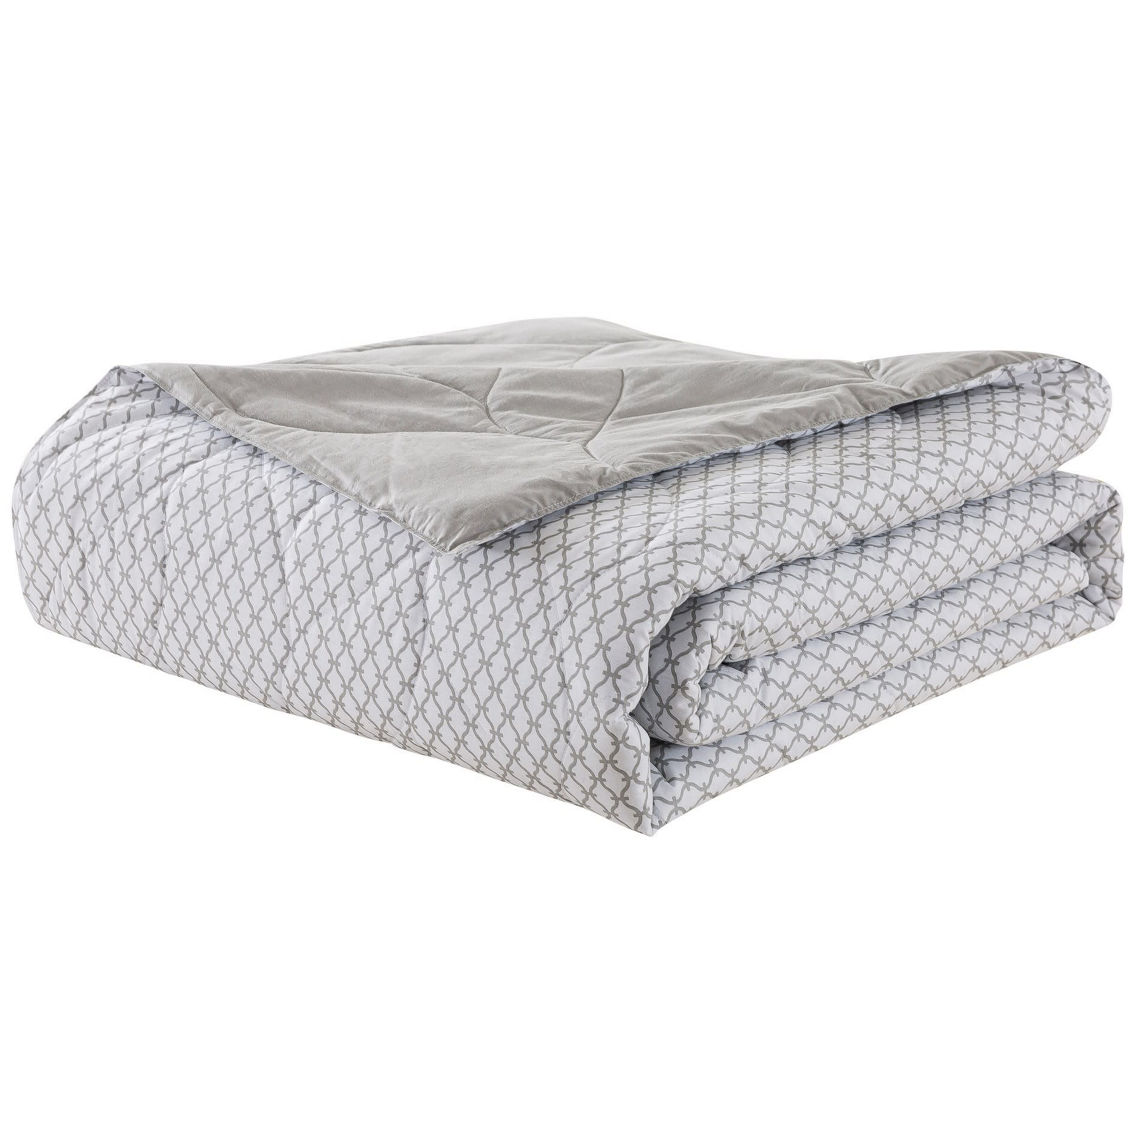 Waverly Antimicrobial Cotton Reversible Down Alternative Blanket - Image 5 of 5